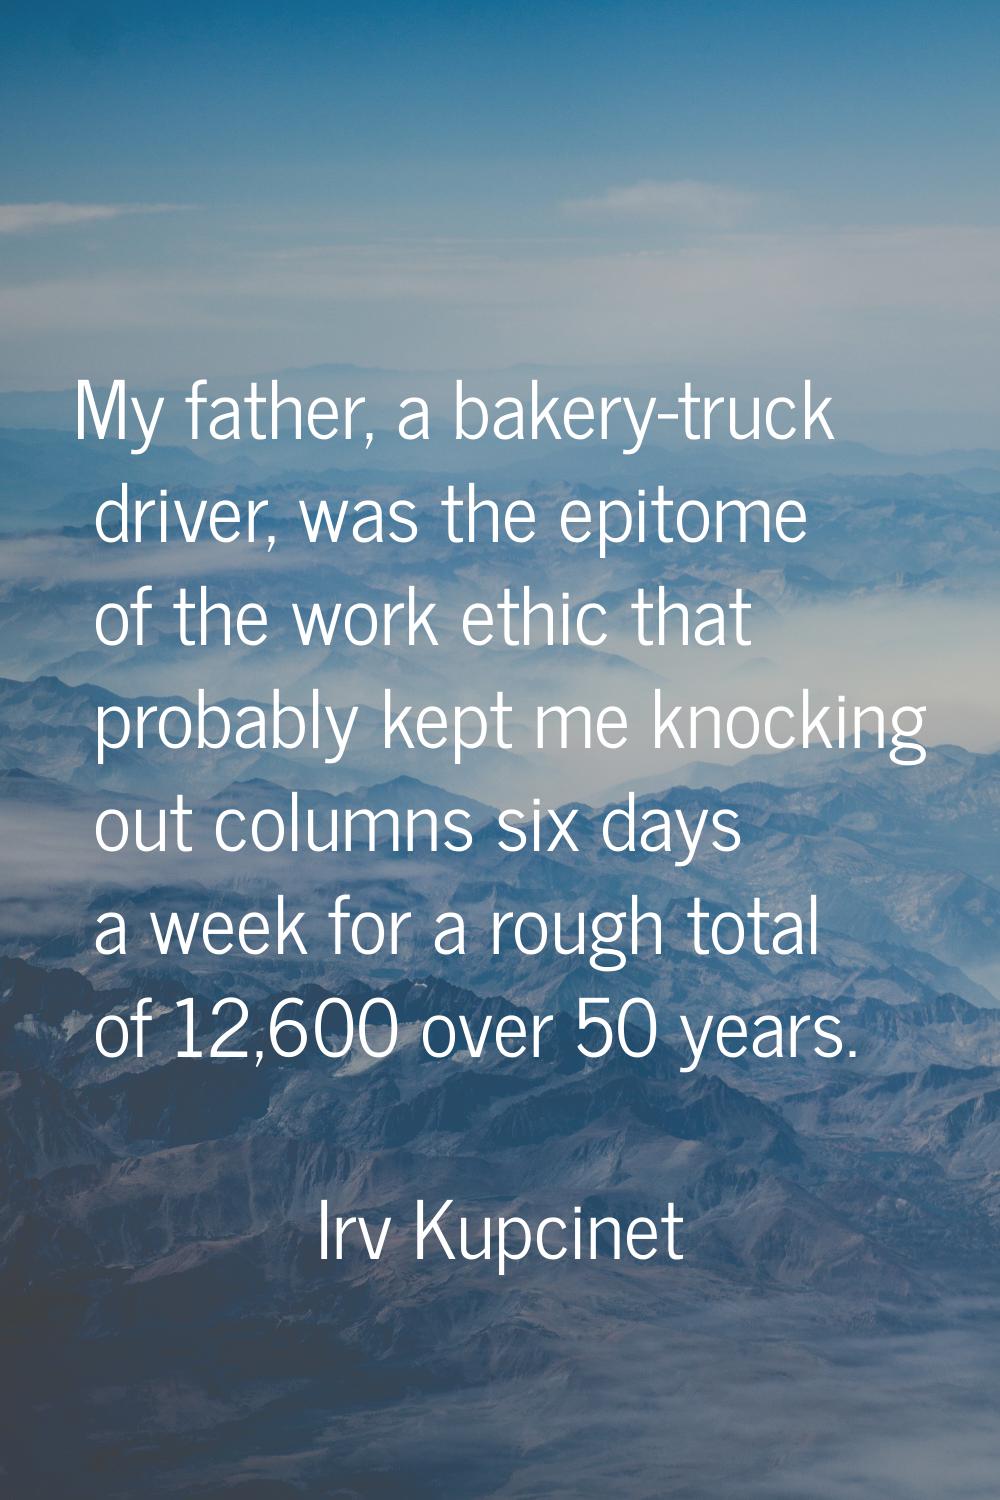 My father, a bakery-truck driver, was the epitome of the work ethic that probably kept me knocking 